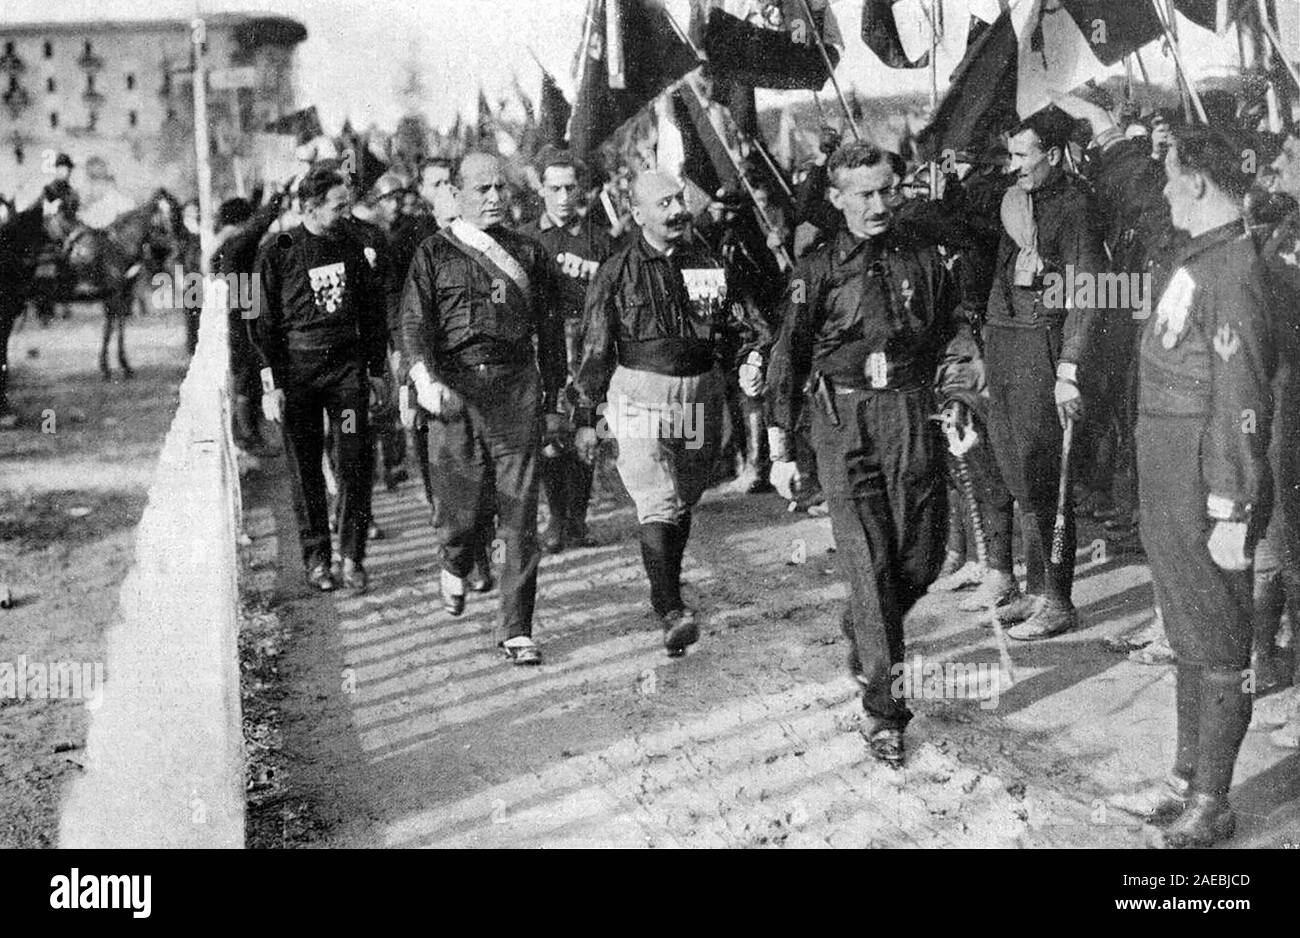 March on Rome, October 1922, Benito Mussolini and Fascist 'Blackshirts' during the March, Private Collection Stock Photo